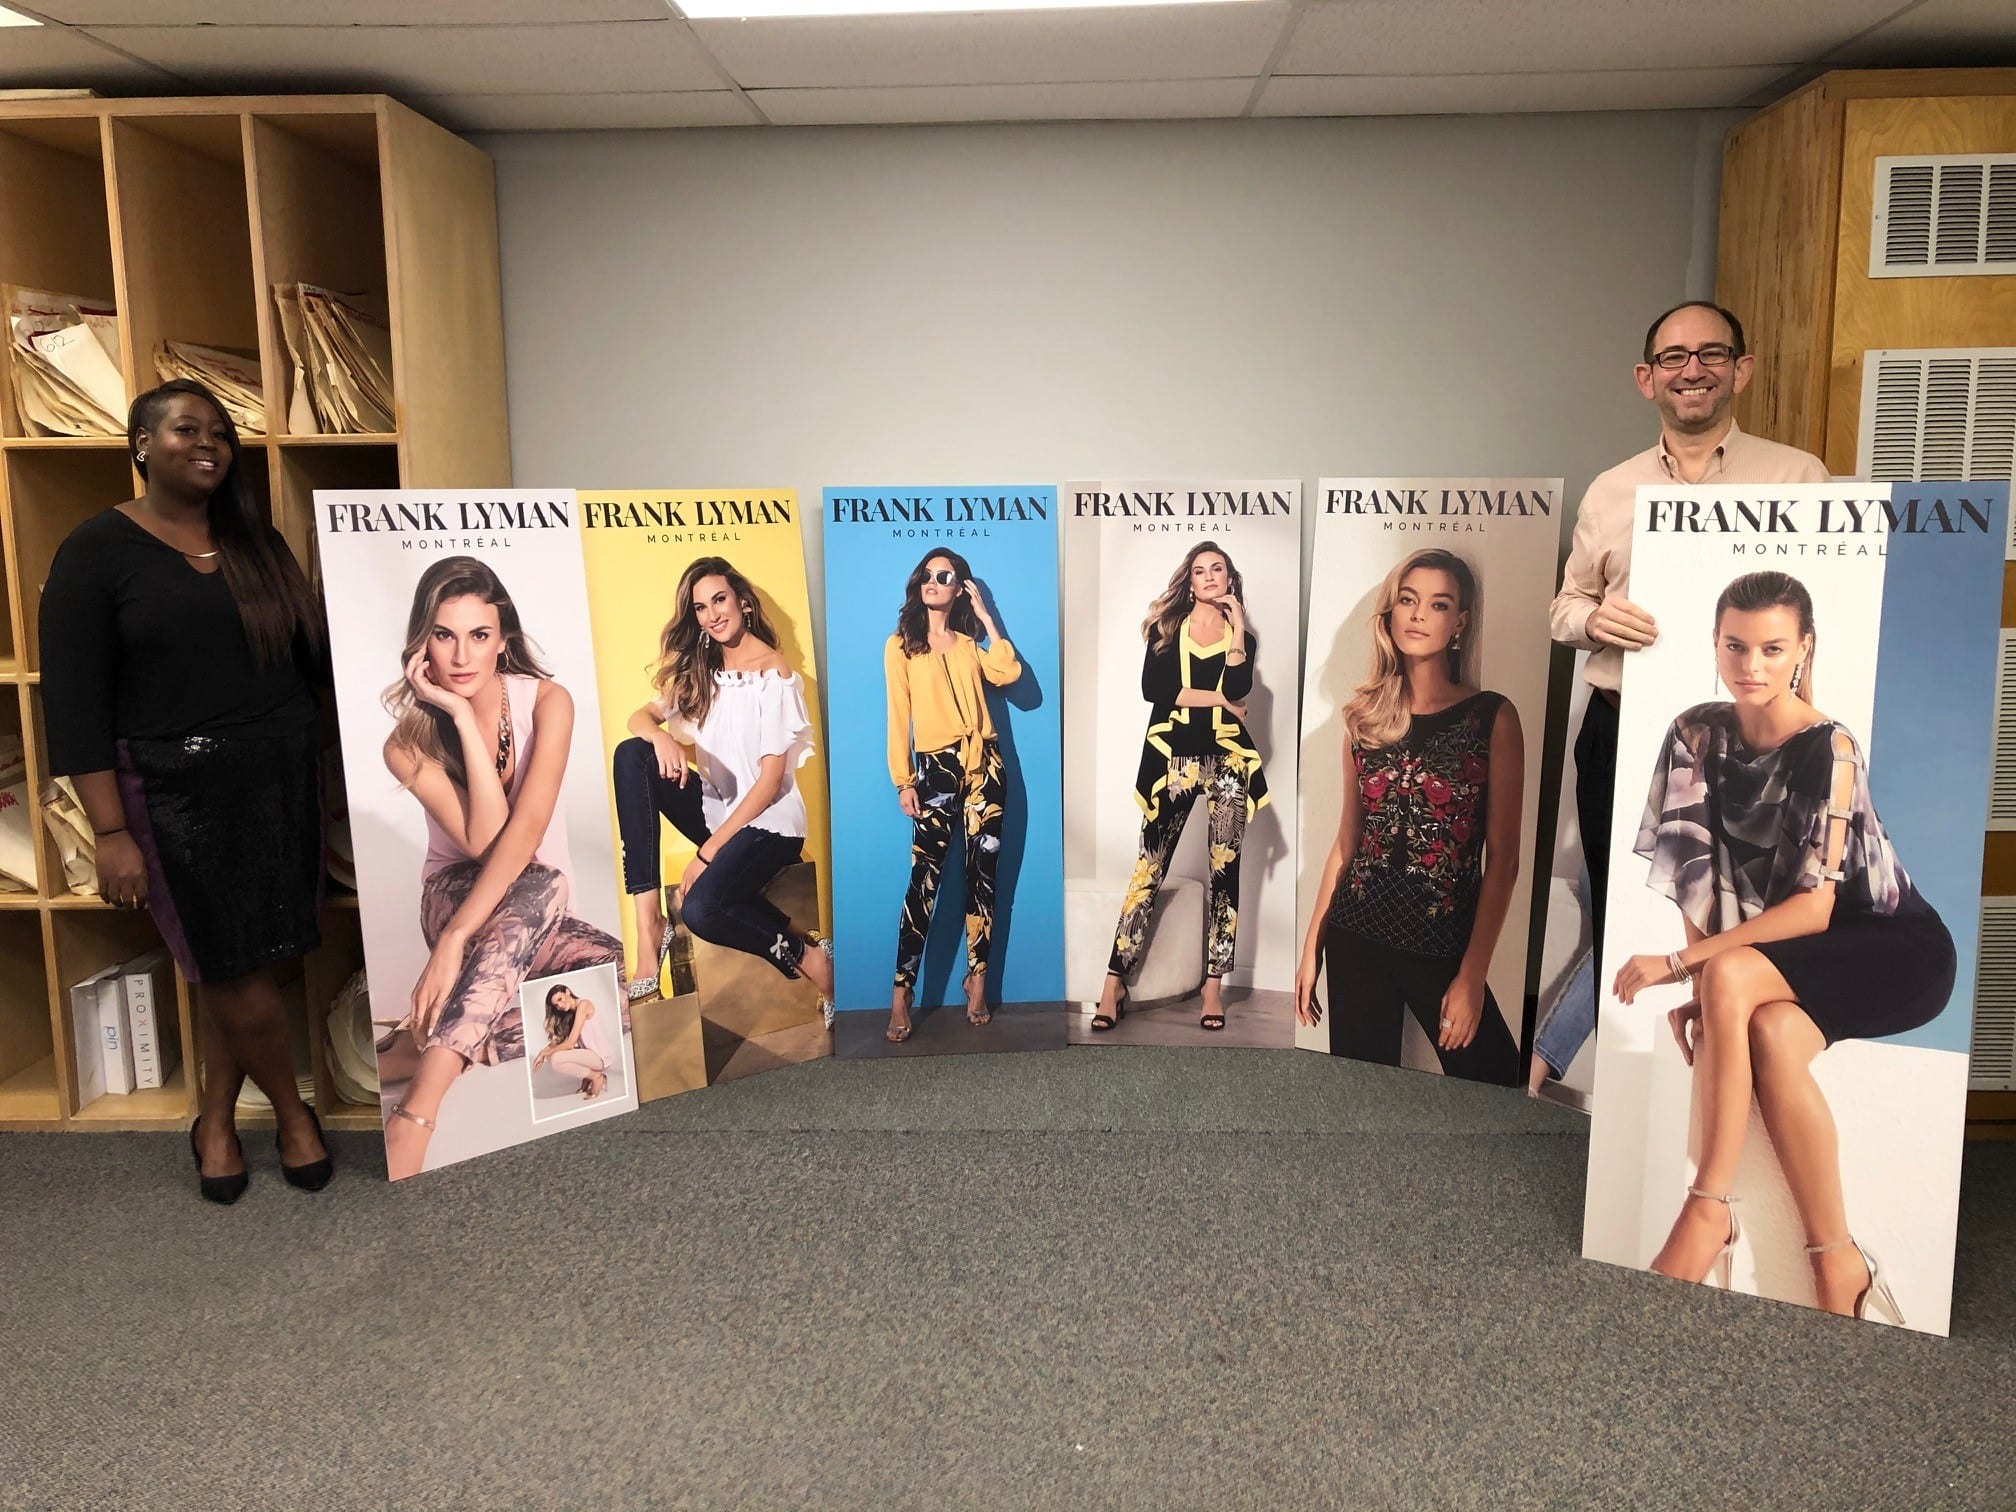 Dave the Printer has Completed Banner Printing for Many Prominent Dallas, TX Customers